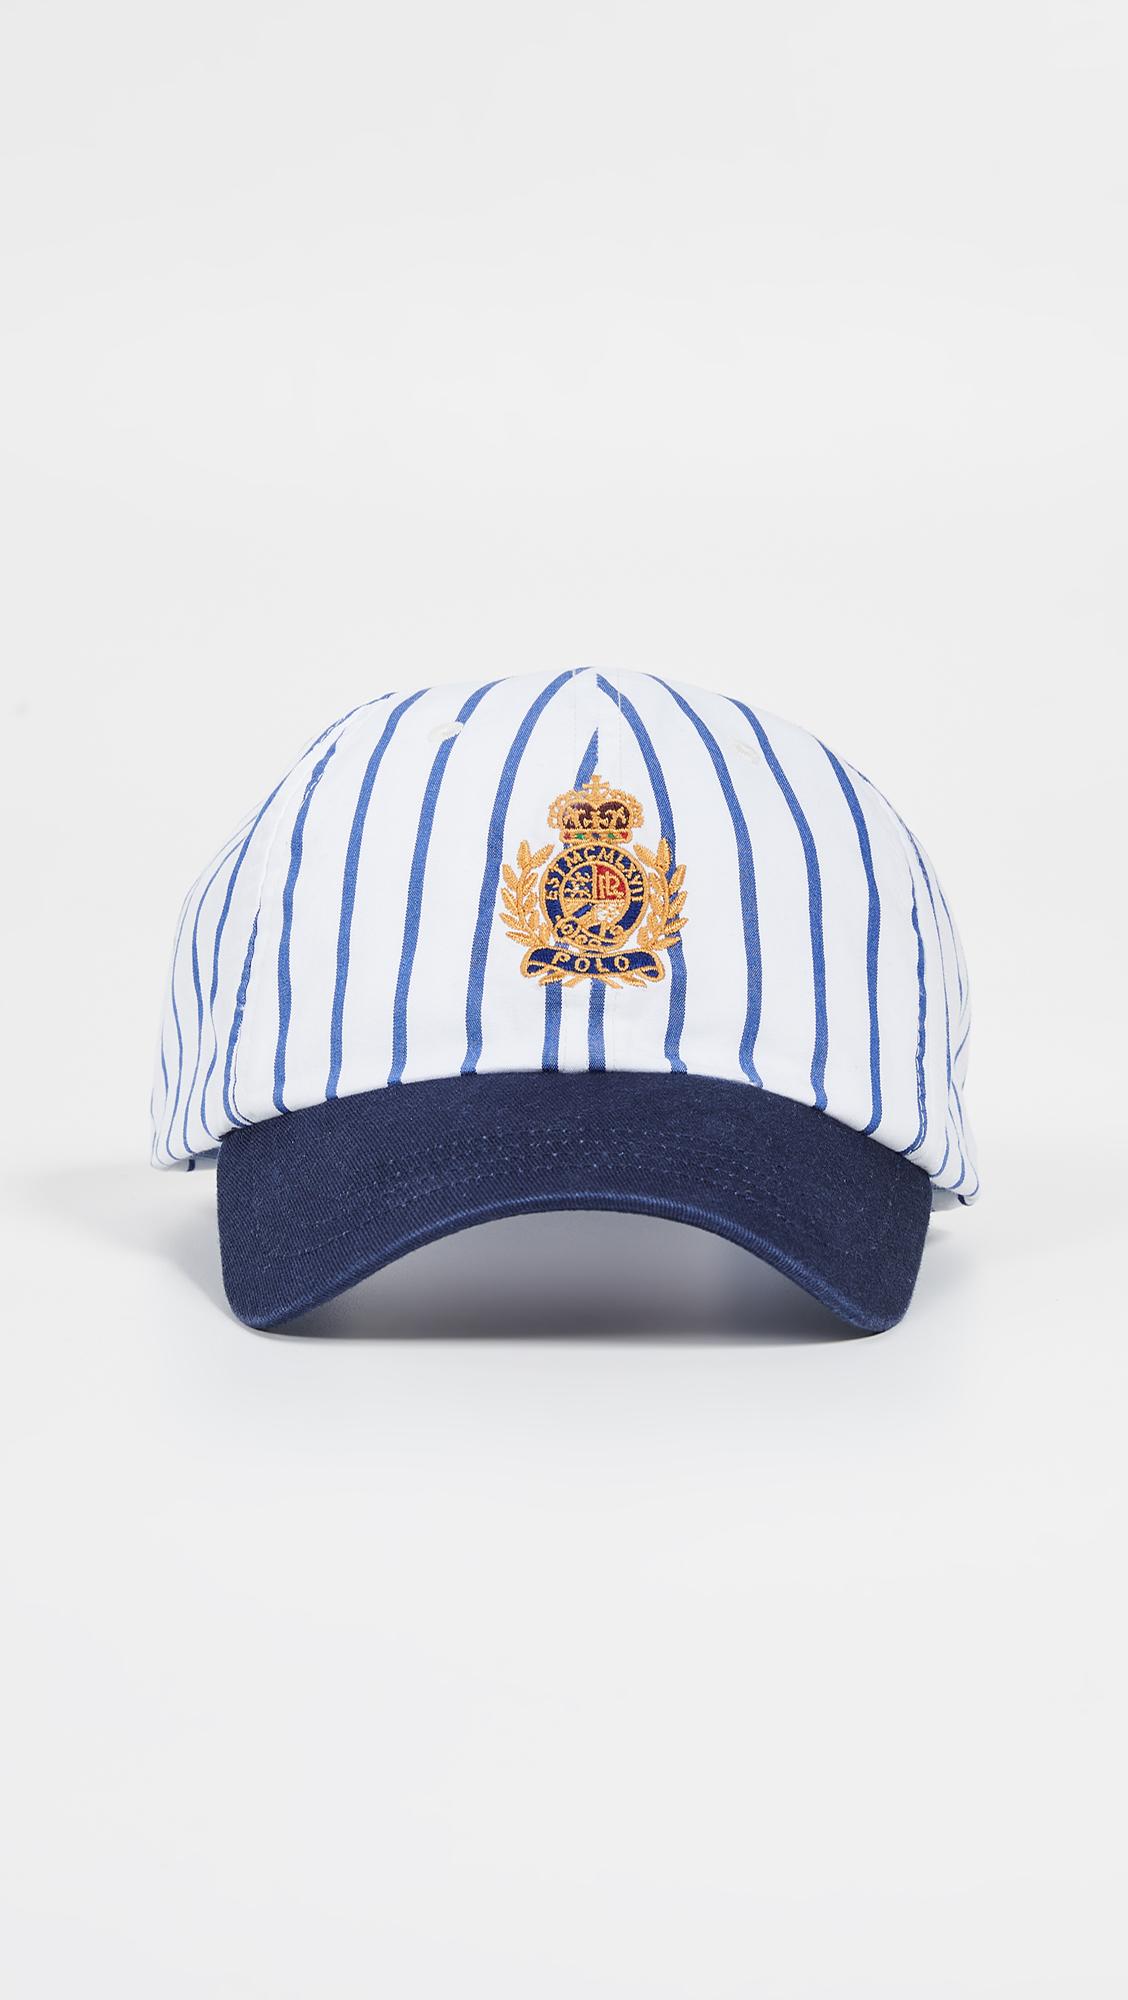 Polo Ralph Lauren Crested Pinstripe Cap in Blue for Men - Save 33% - Lyst